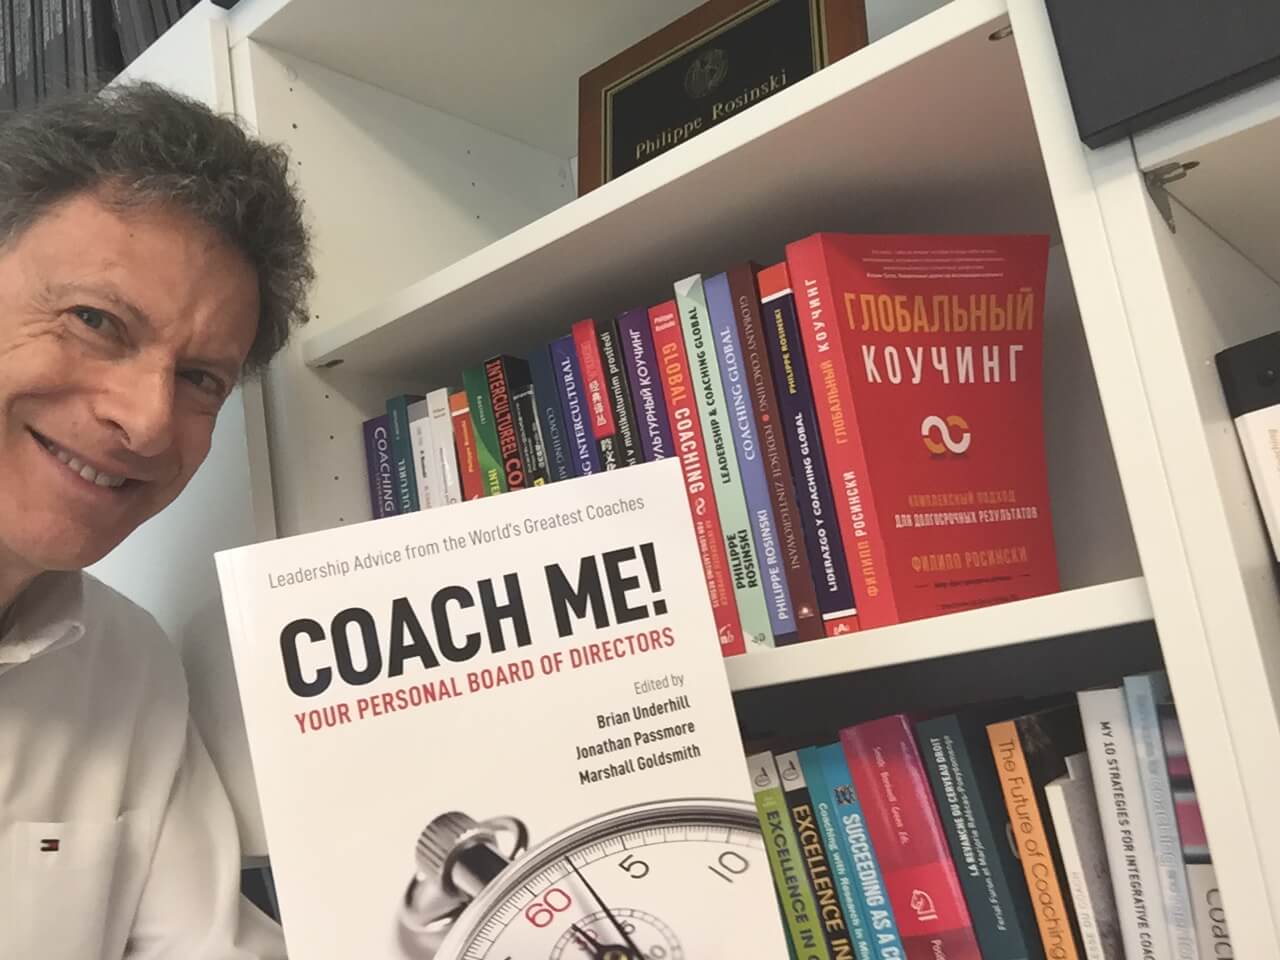 Publication of “Coach Me! Your Personal Board of Directors: Leadership Advice from the World’s Greatest Coaches”